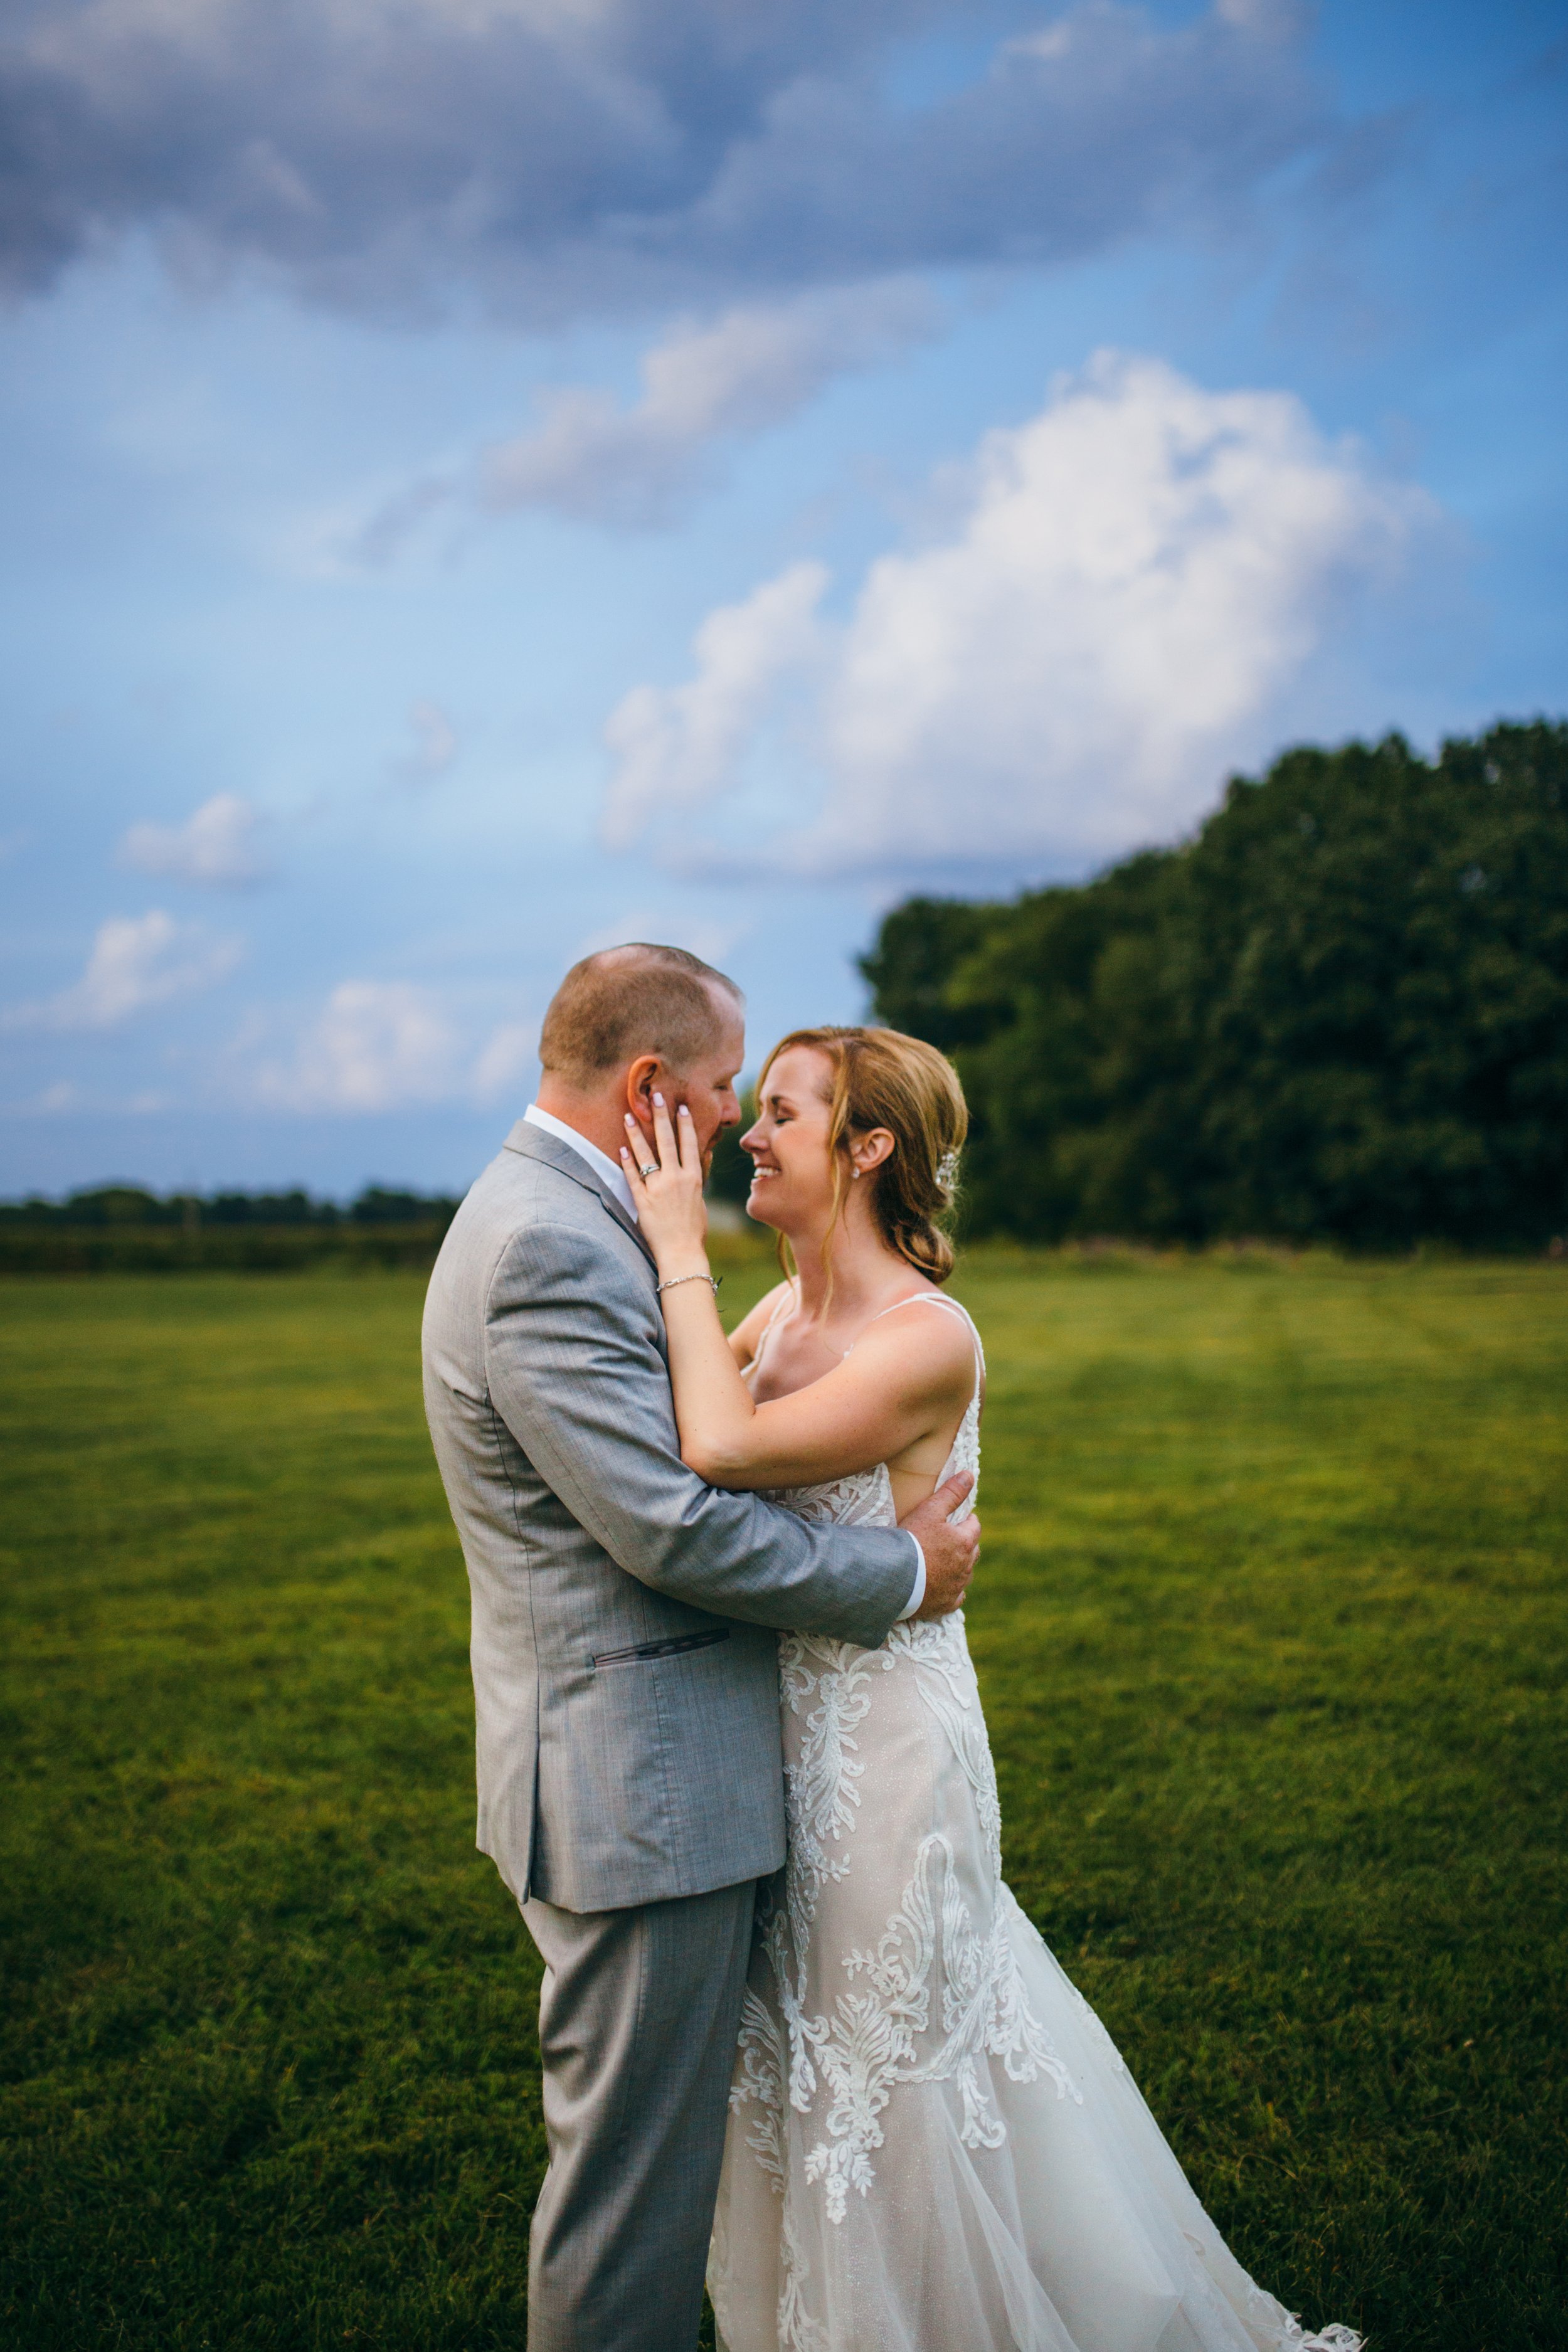  Teala Ward Photography captures a bride and groom with a dramatic Illinois Sky in the background. Blue sky bridals wedding day sky #TealaWardPhotography #IllinoisValleyPhotographer #summerwedding #TealaWardWeddings #Illinoisweddings  